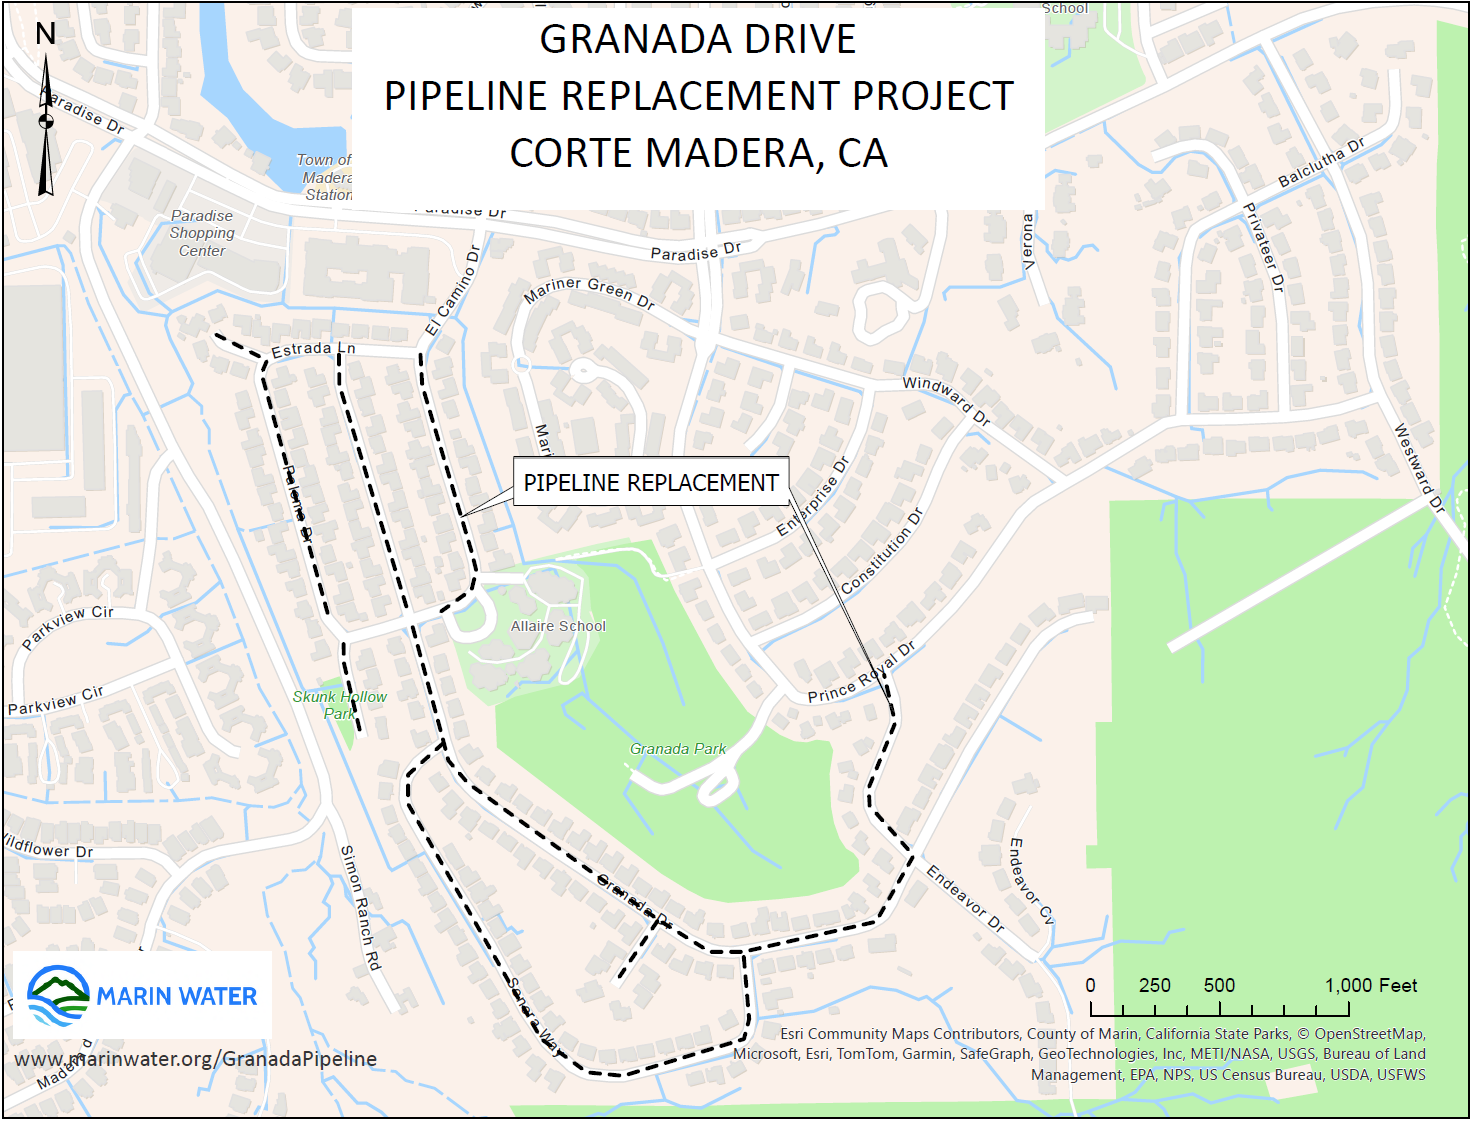 Map labeled Granada Drive Pipeline Replacement Project; Corte Madera, CA.